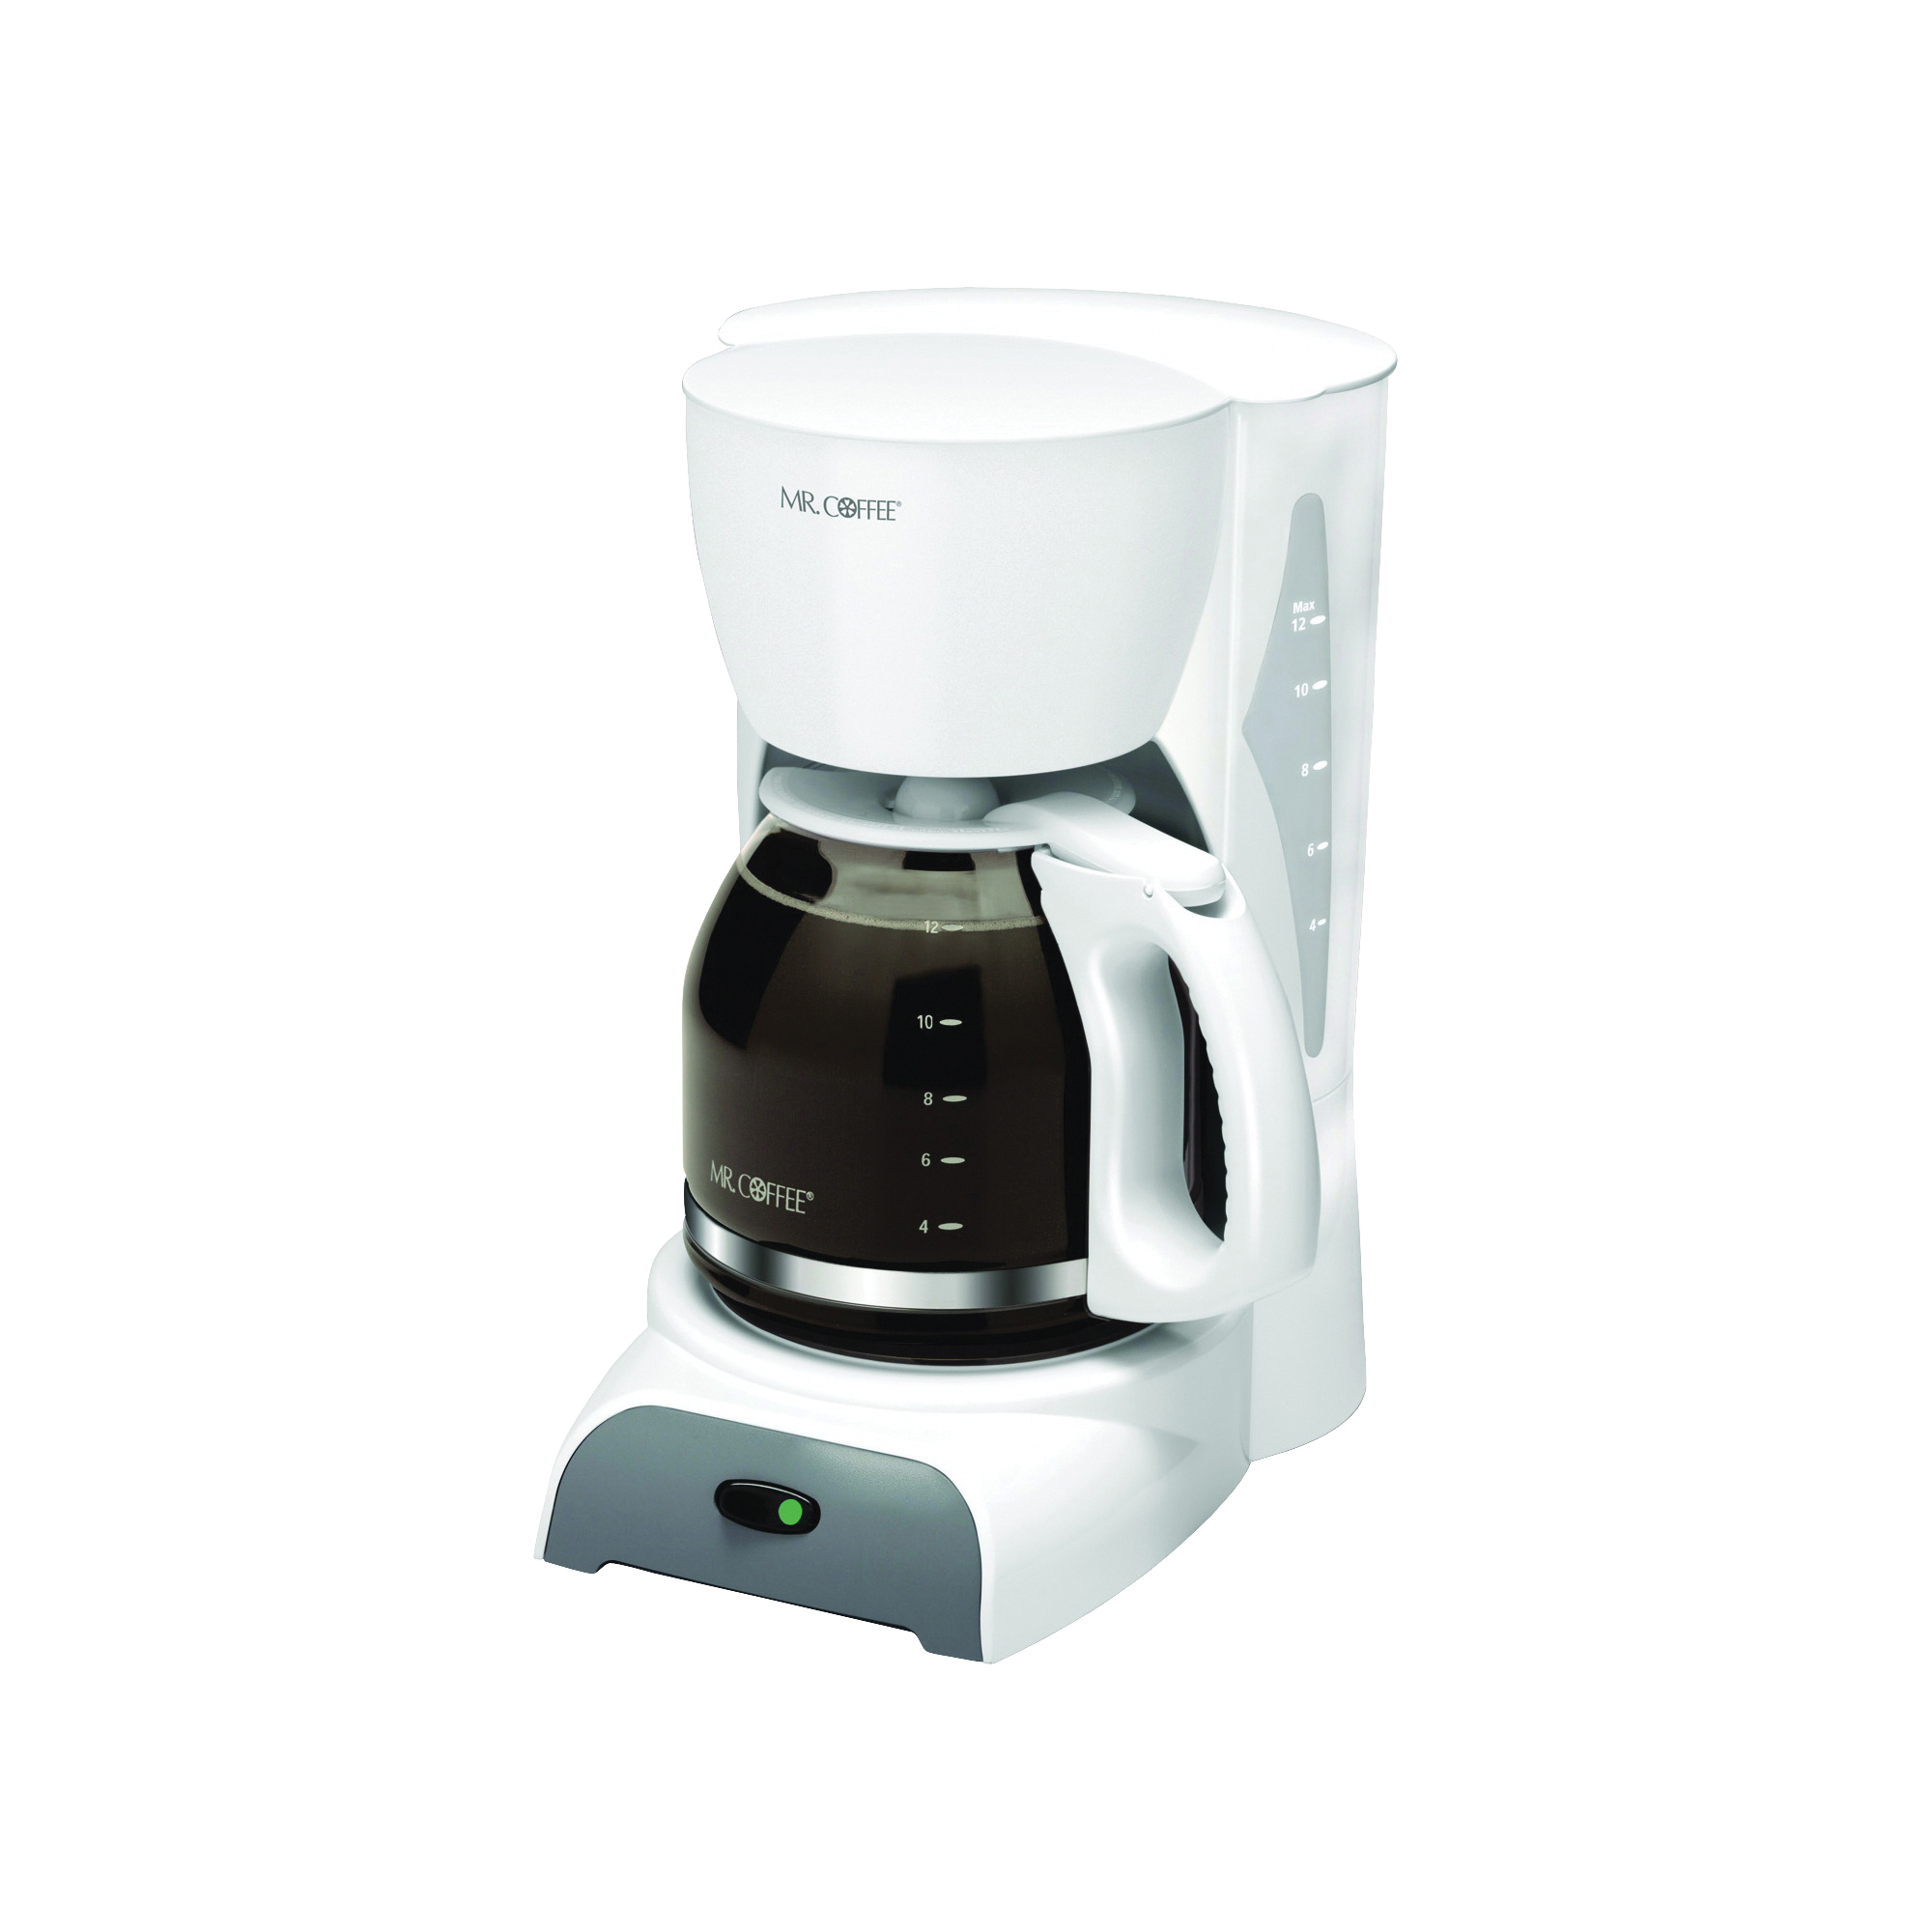 Mr. Coffee 12-Cup Manual Coffee Maker, White 